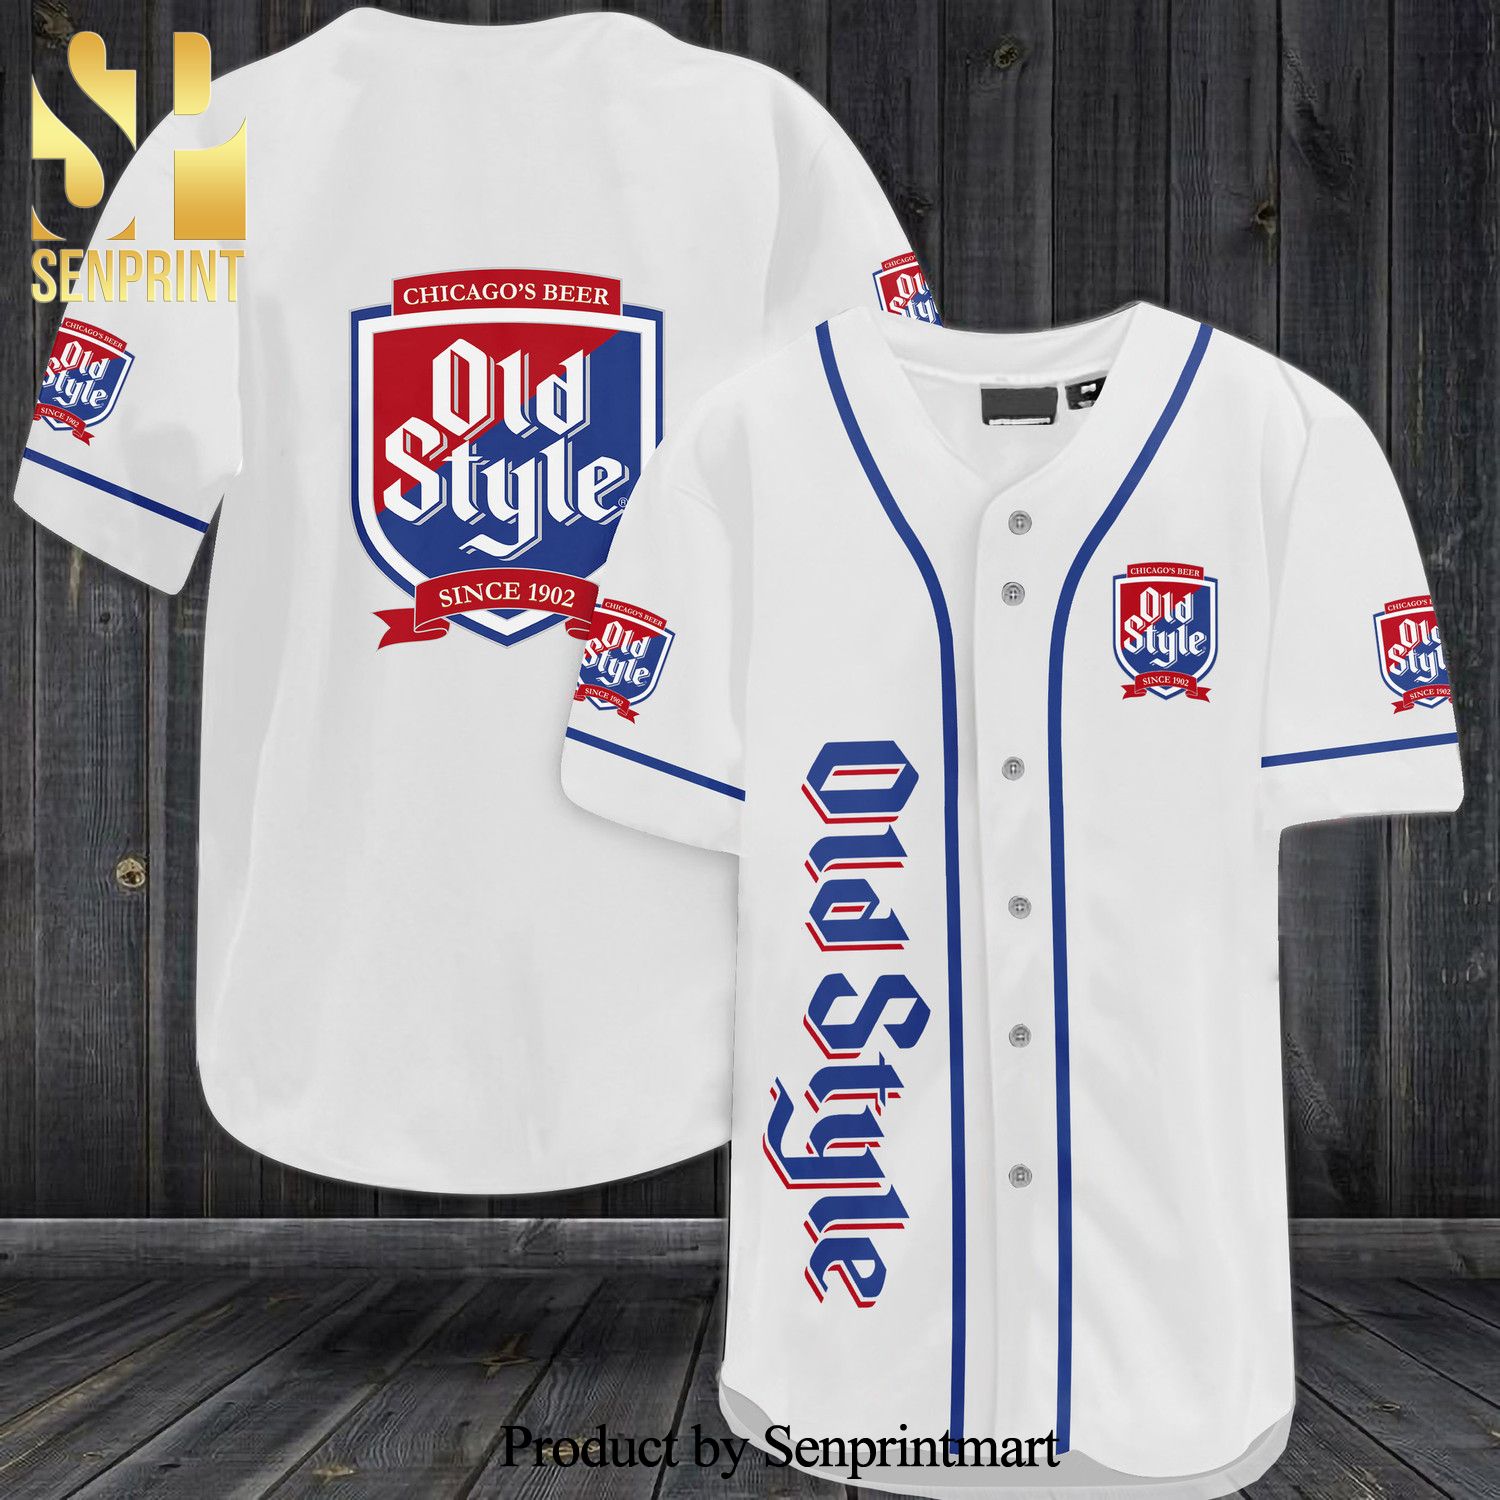 Old Style Chicago's Beer All Over Print Baseball Jersey - White